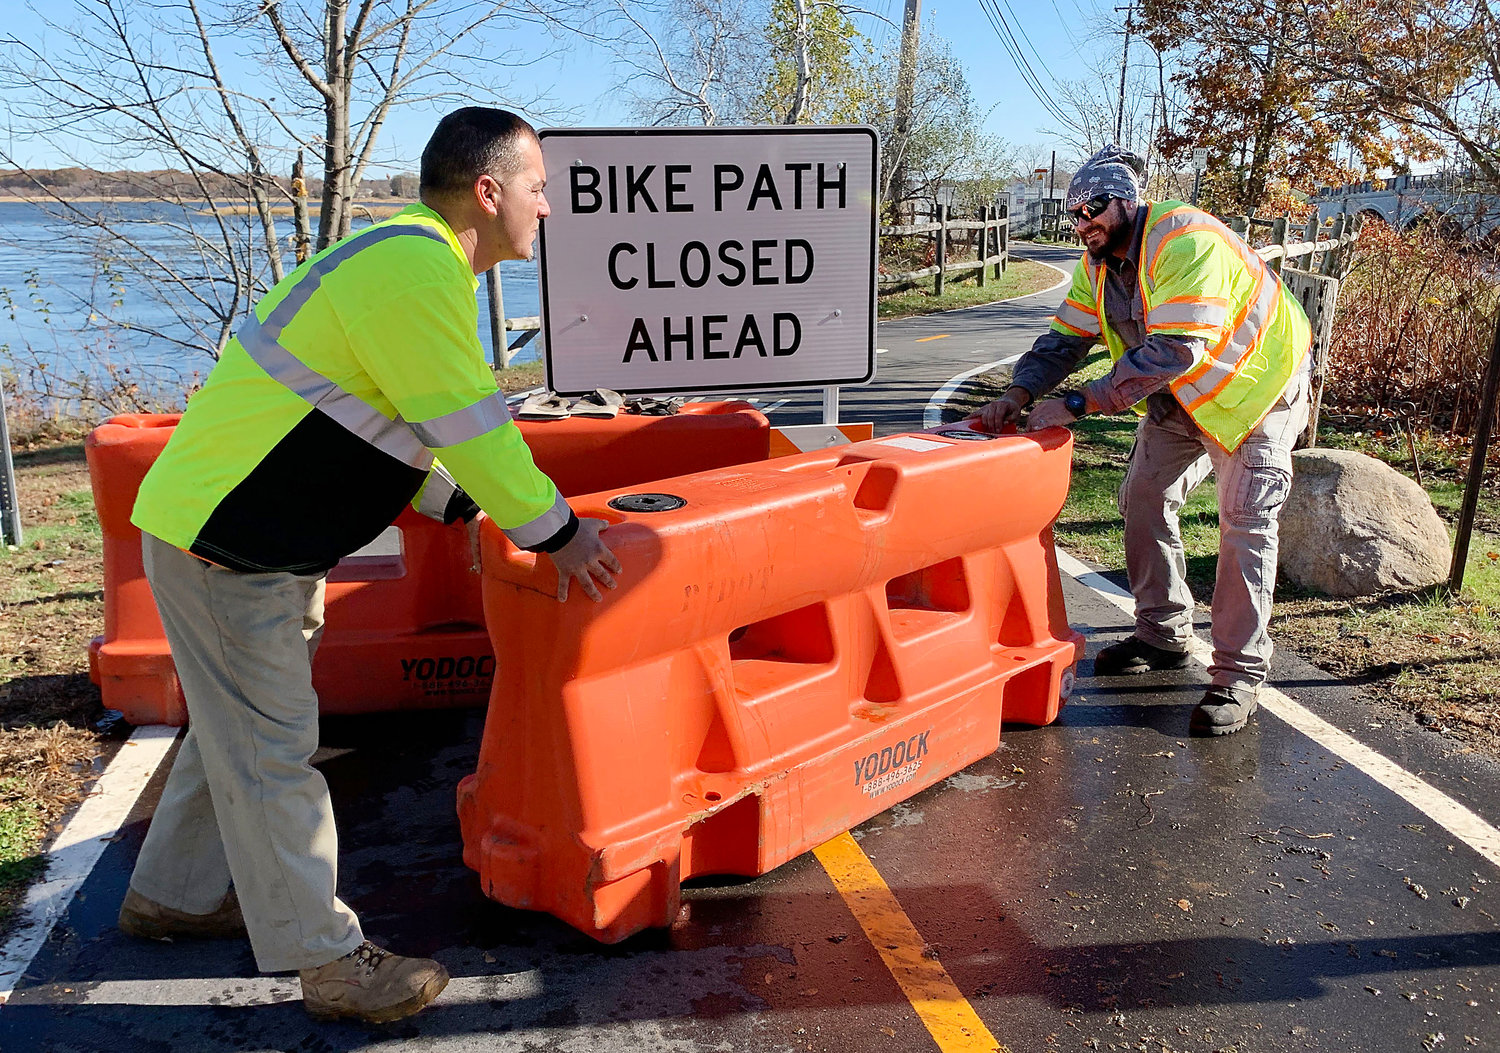 RIDOT workers block off the Warren bike path bridge on Friday morning, making the bridge impassable to cyclists and walkers till further notice.